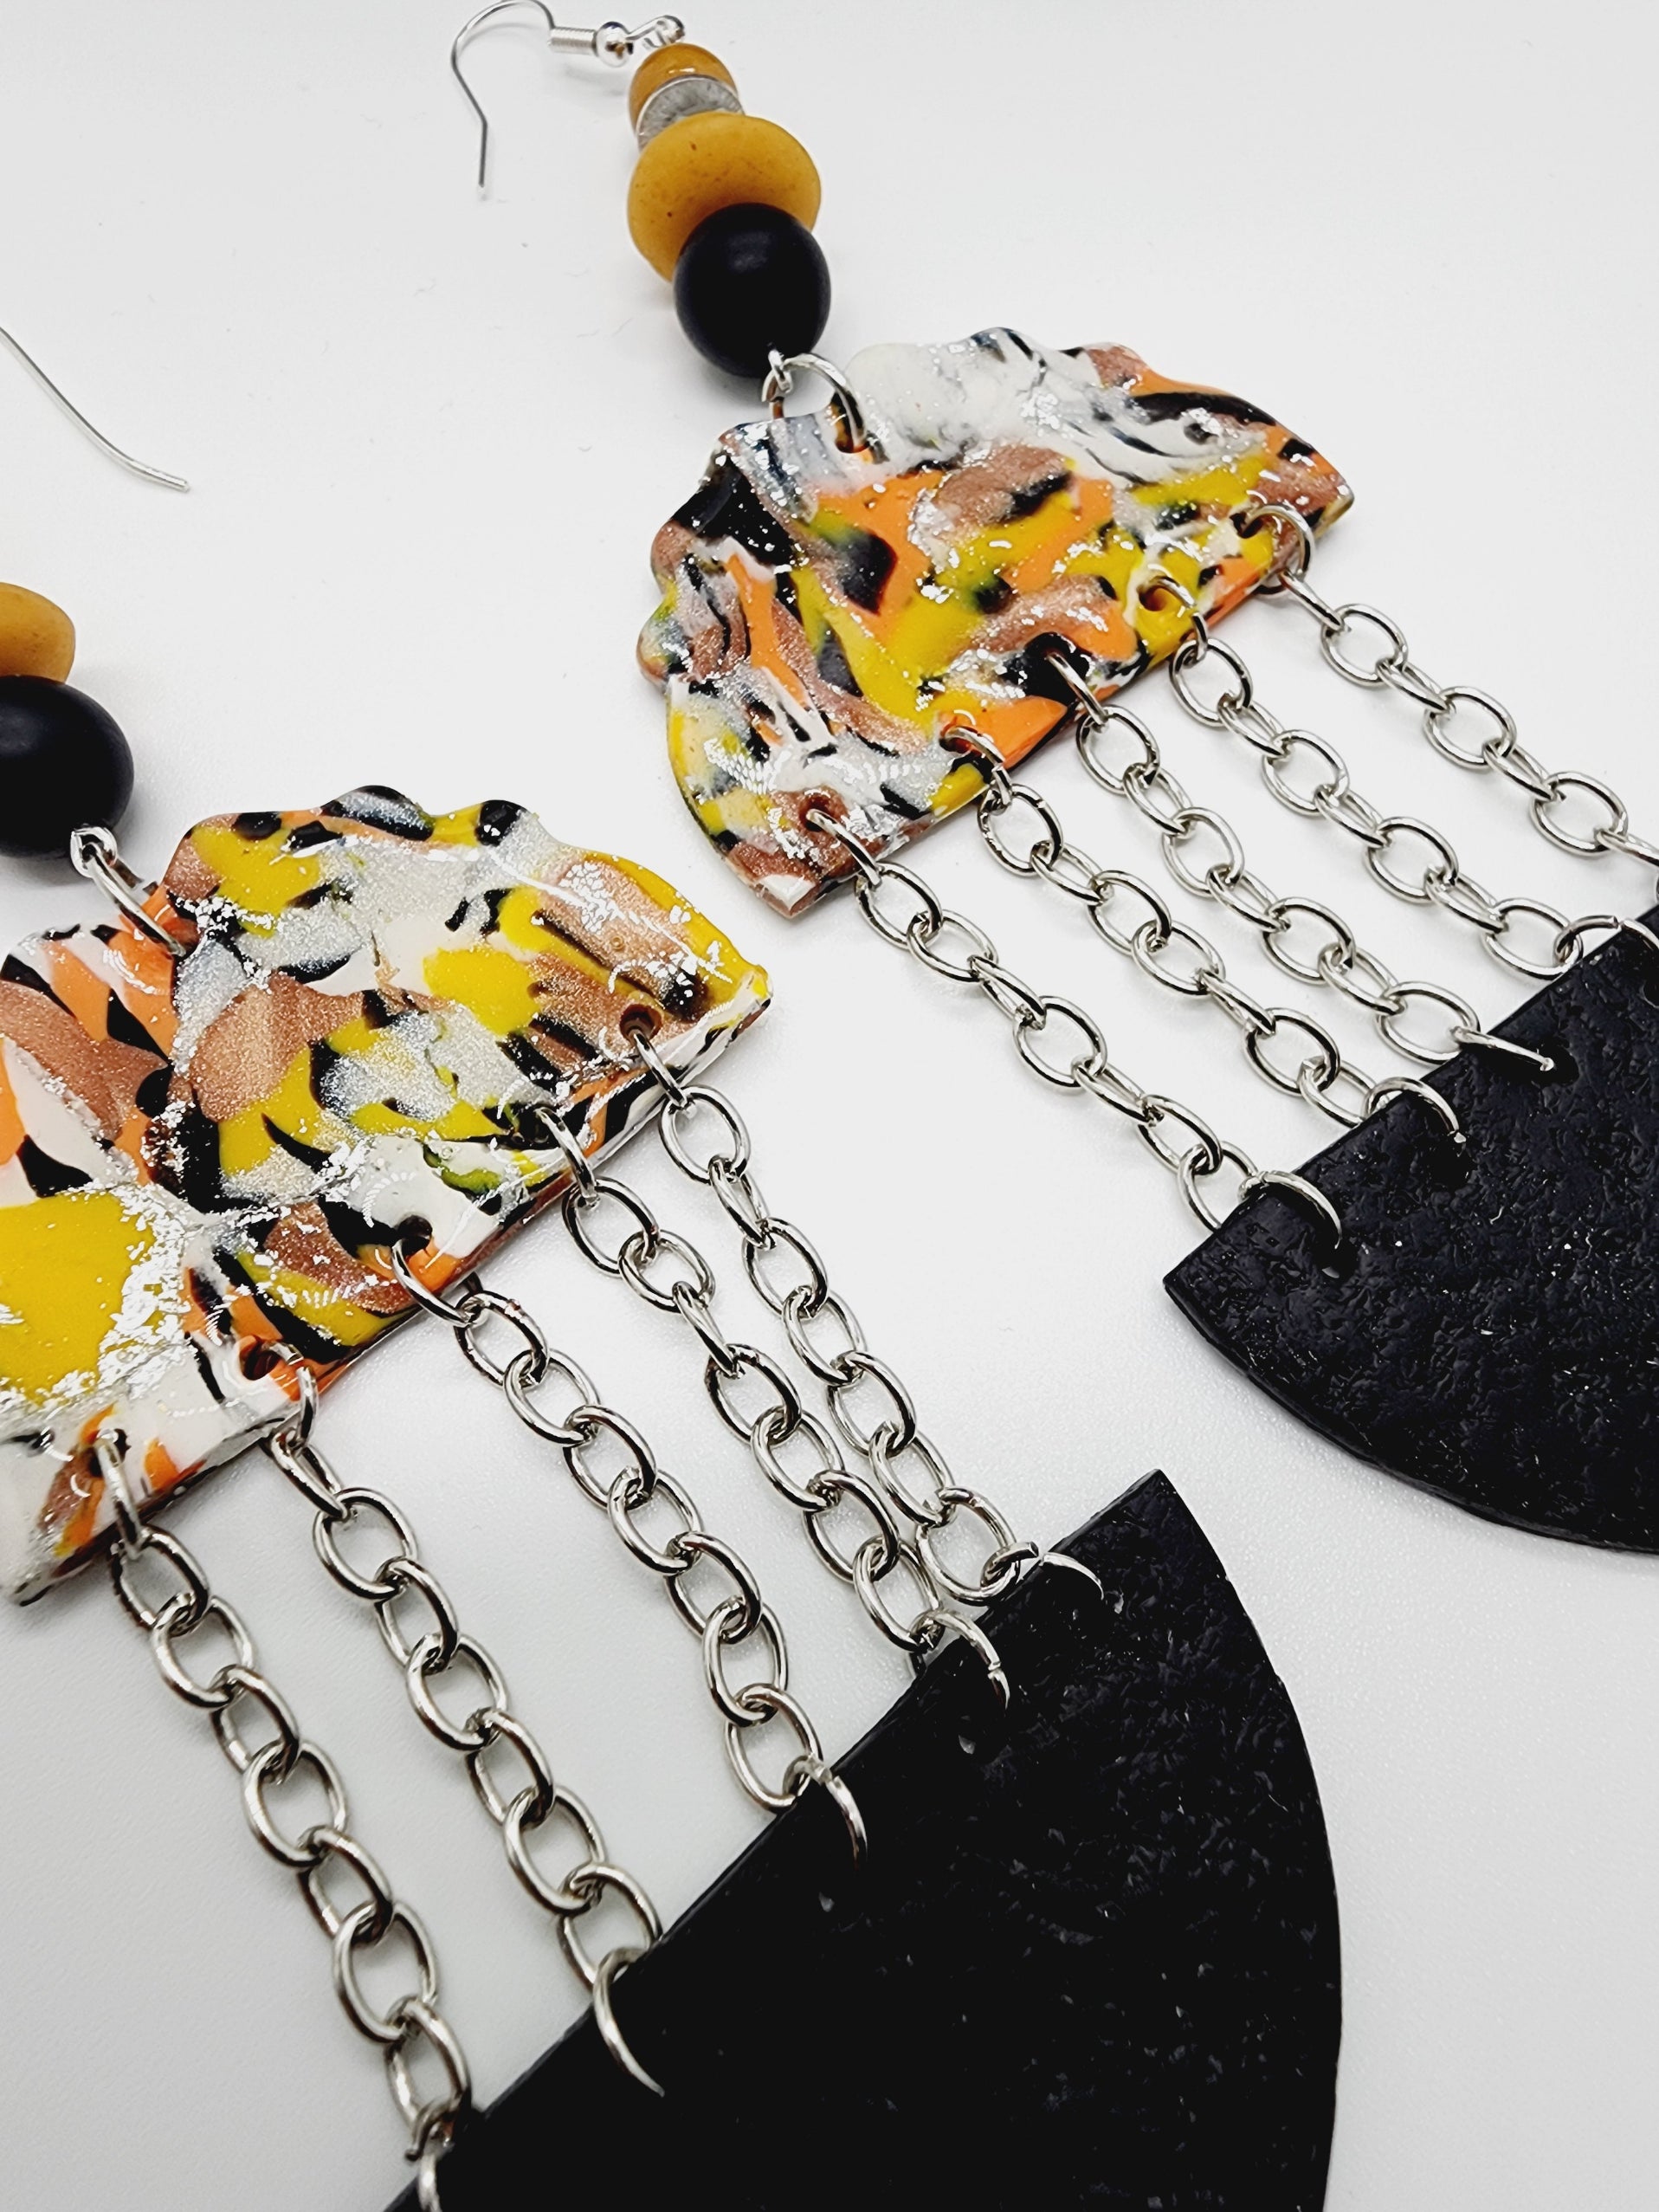 Length: 5.5 inches | Weight: 1.1 ounces   Distinctly You! These handmade earrings are made using orange, yellow, black and grey swirl polymer clay, silver chain, and hypoallergenic hooks with back closures. 